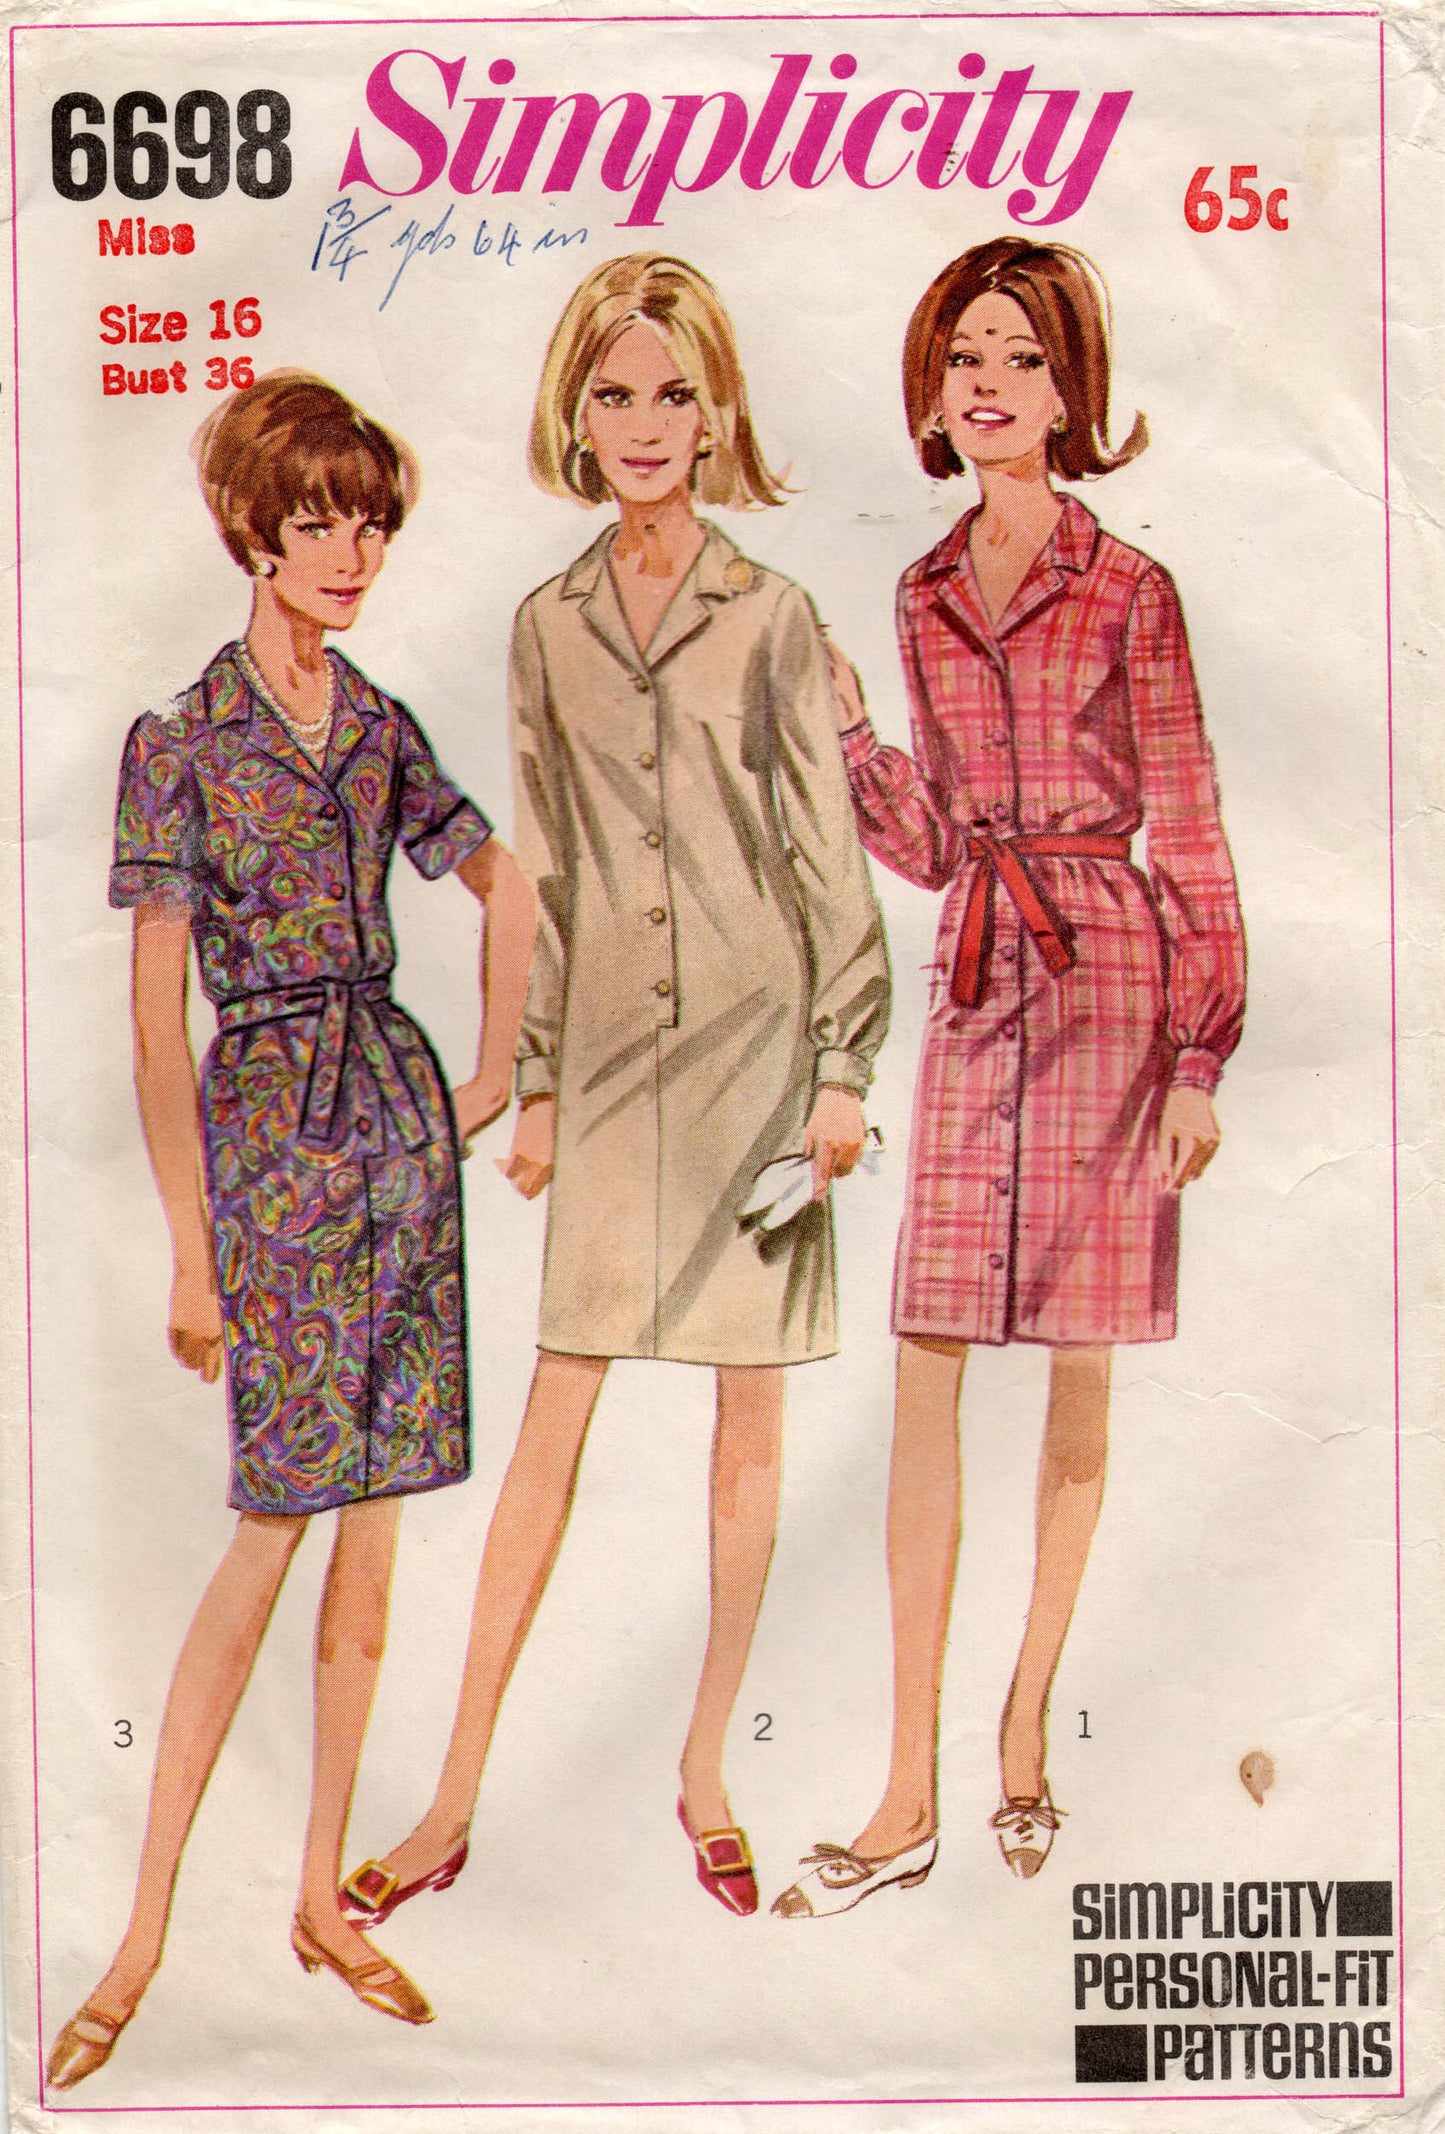 Simplicity 6698 Womens Classic Shirtdress 1960s Vintage Sewing Pattern Bust 34 or 36 inches